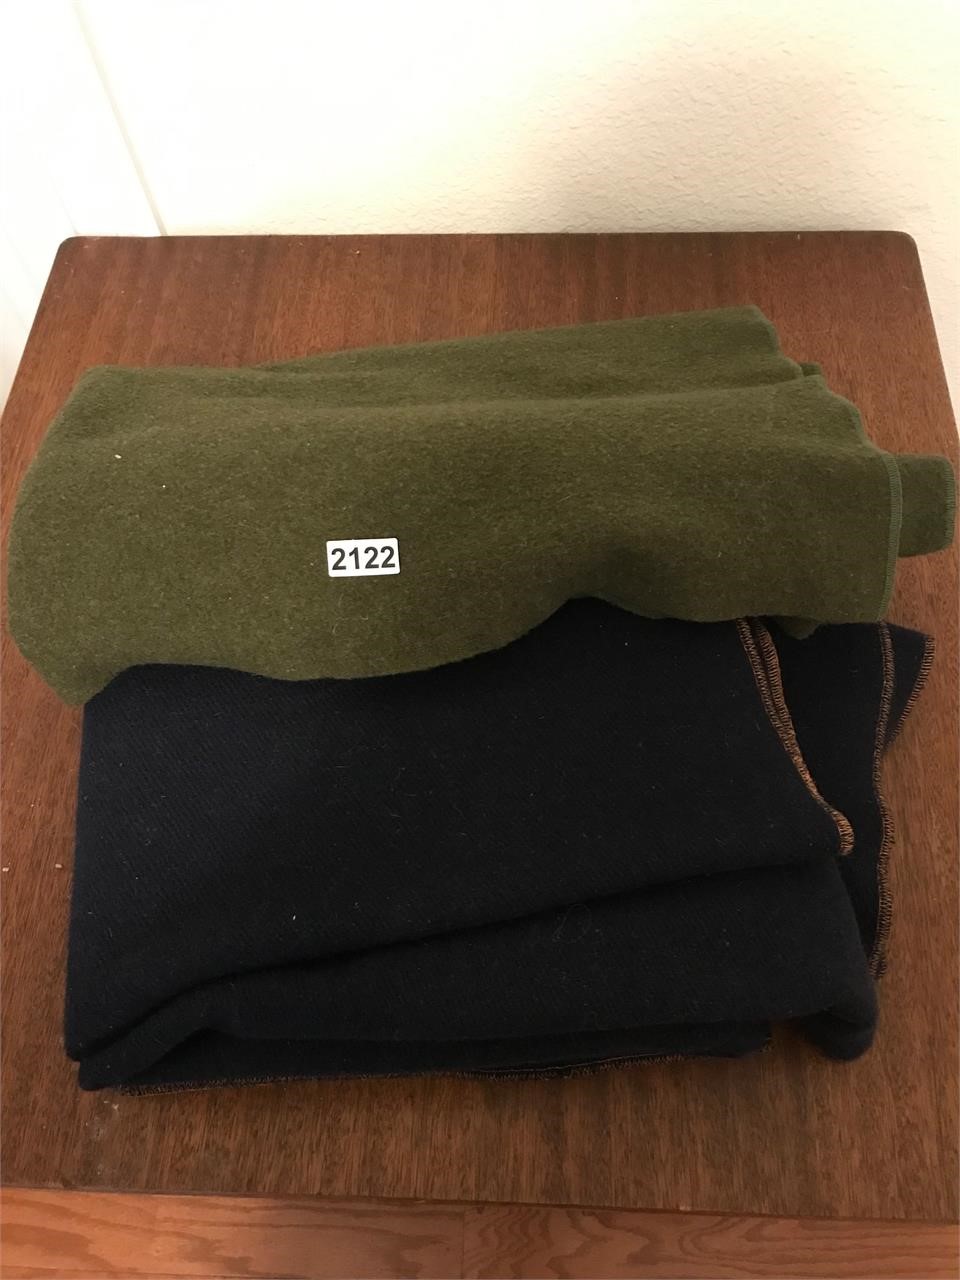 Wool blankets - one vintage army, one new